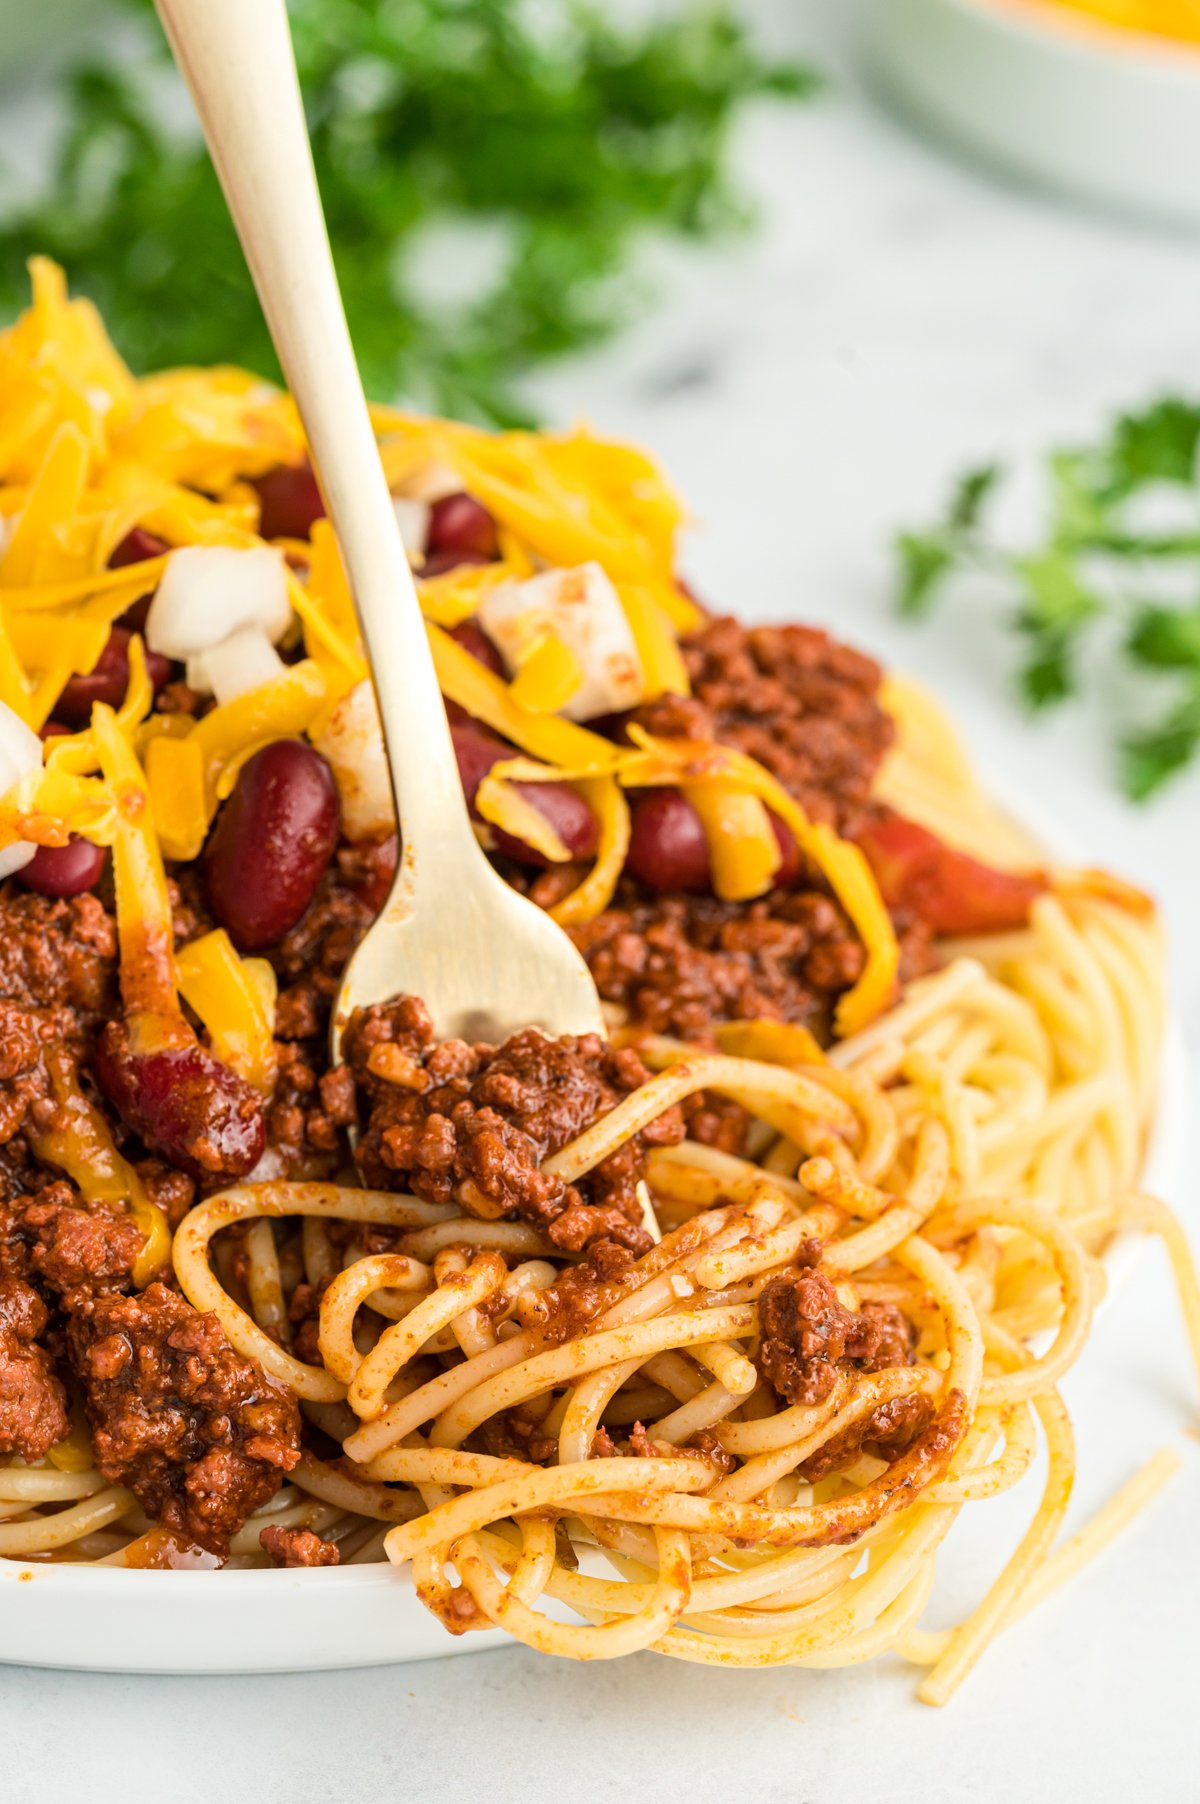 Cincinnati chili on a plate with a fork in it.